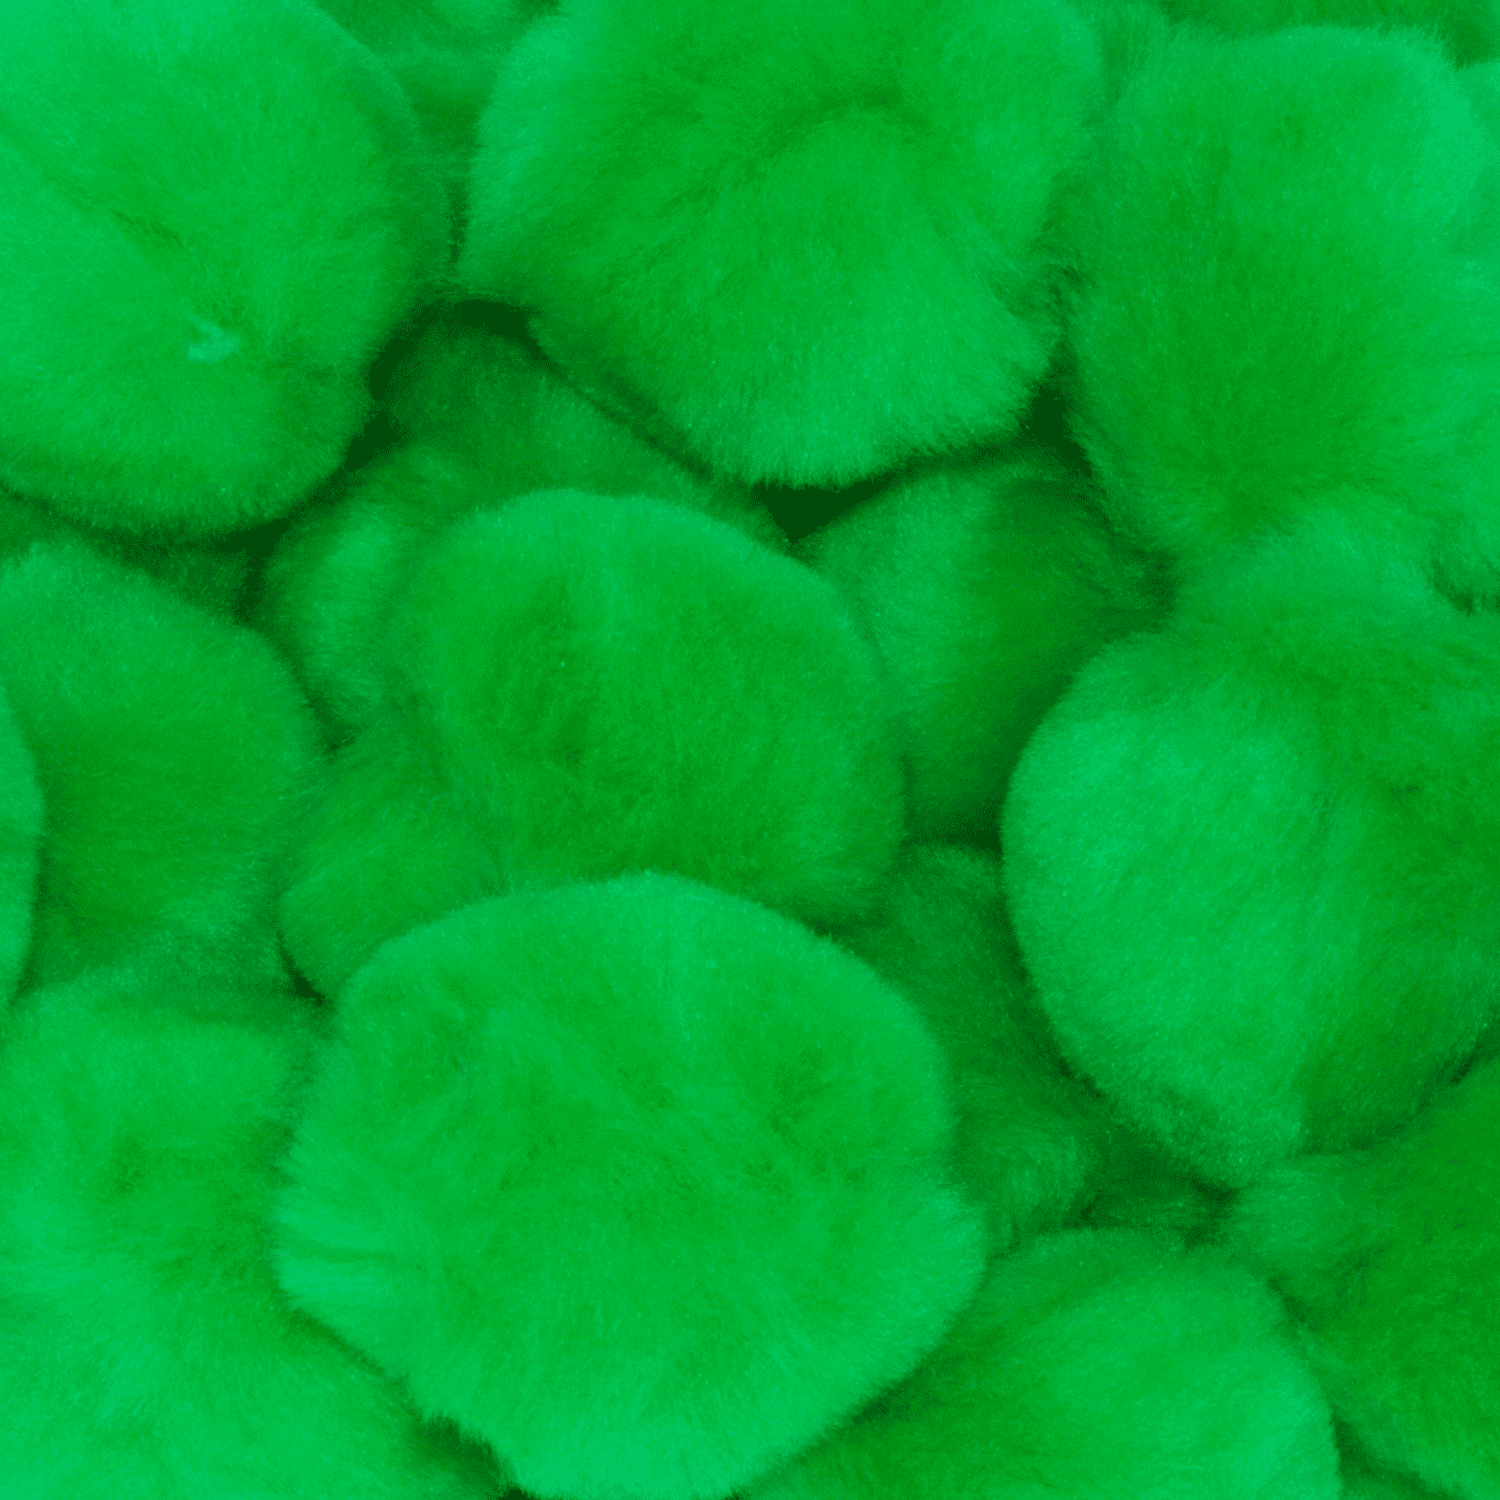 Pom Poms, Emerald Green, 1 Inch, Pack of 80